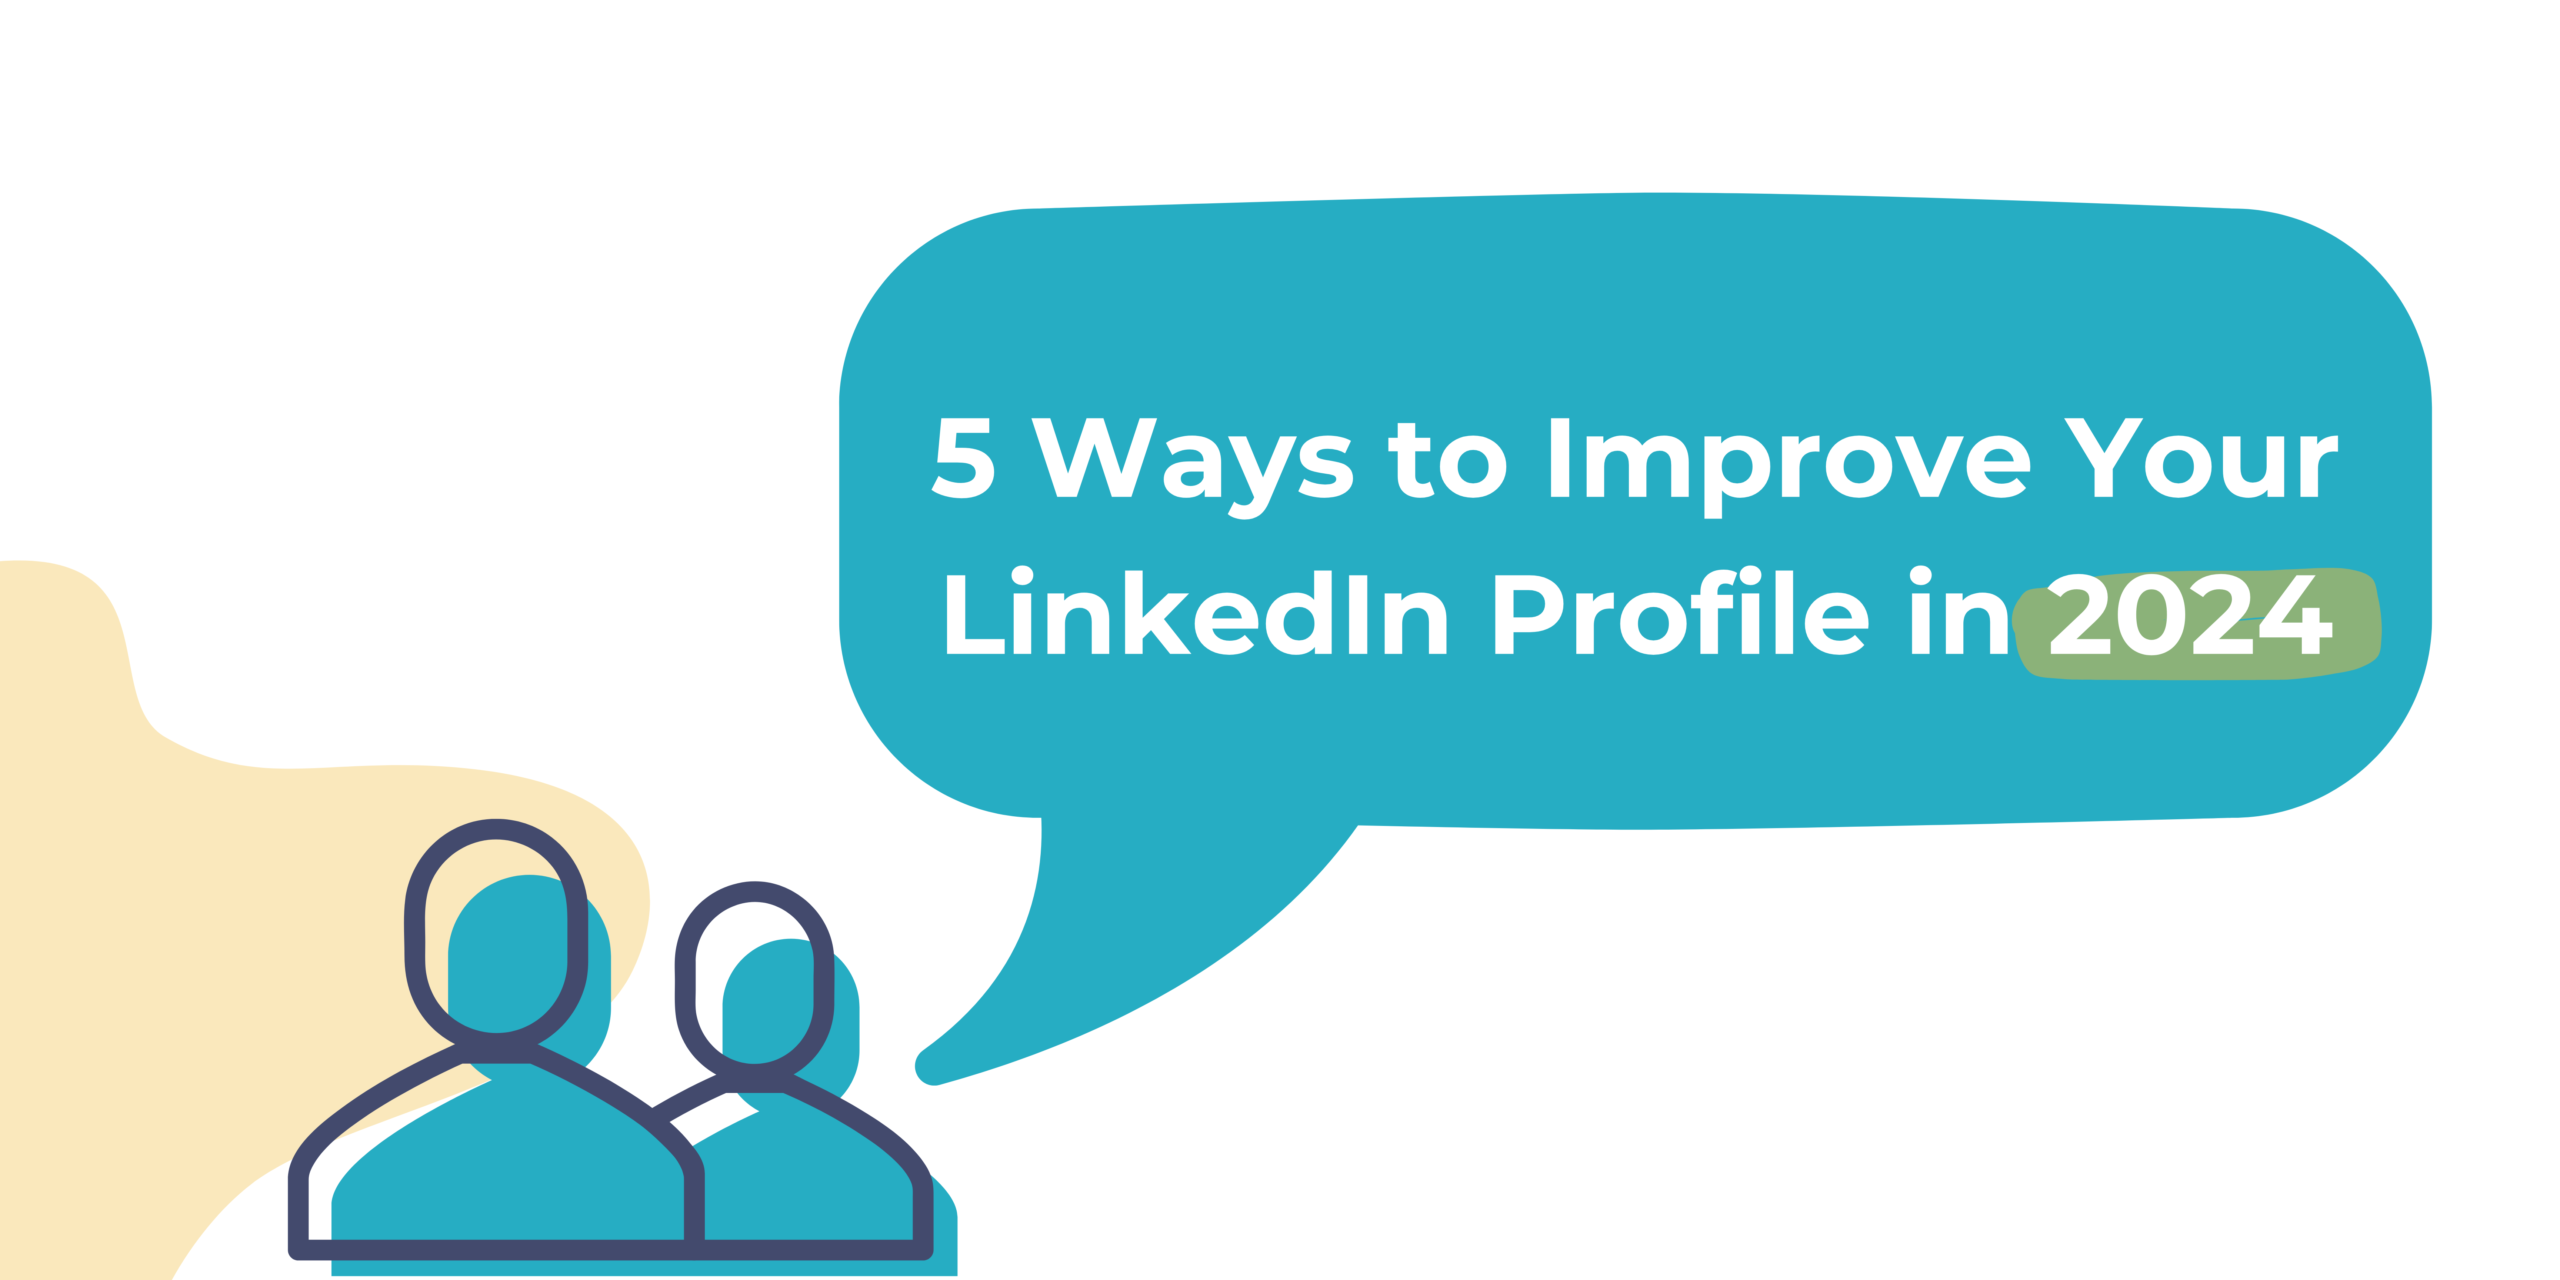 "5 Ways to Improve Your LinkedIn Profile in 2024" is written in white text inside of a speech bubble